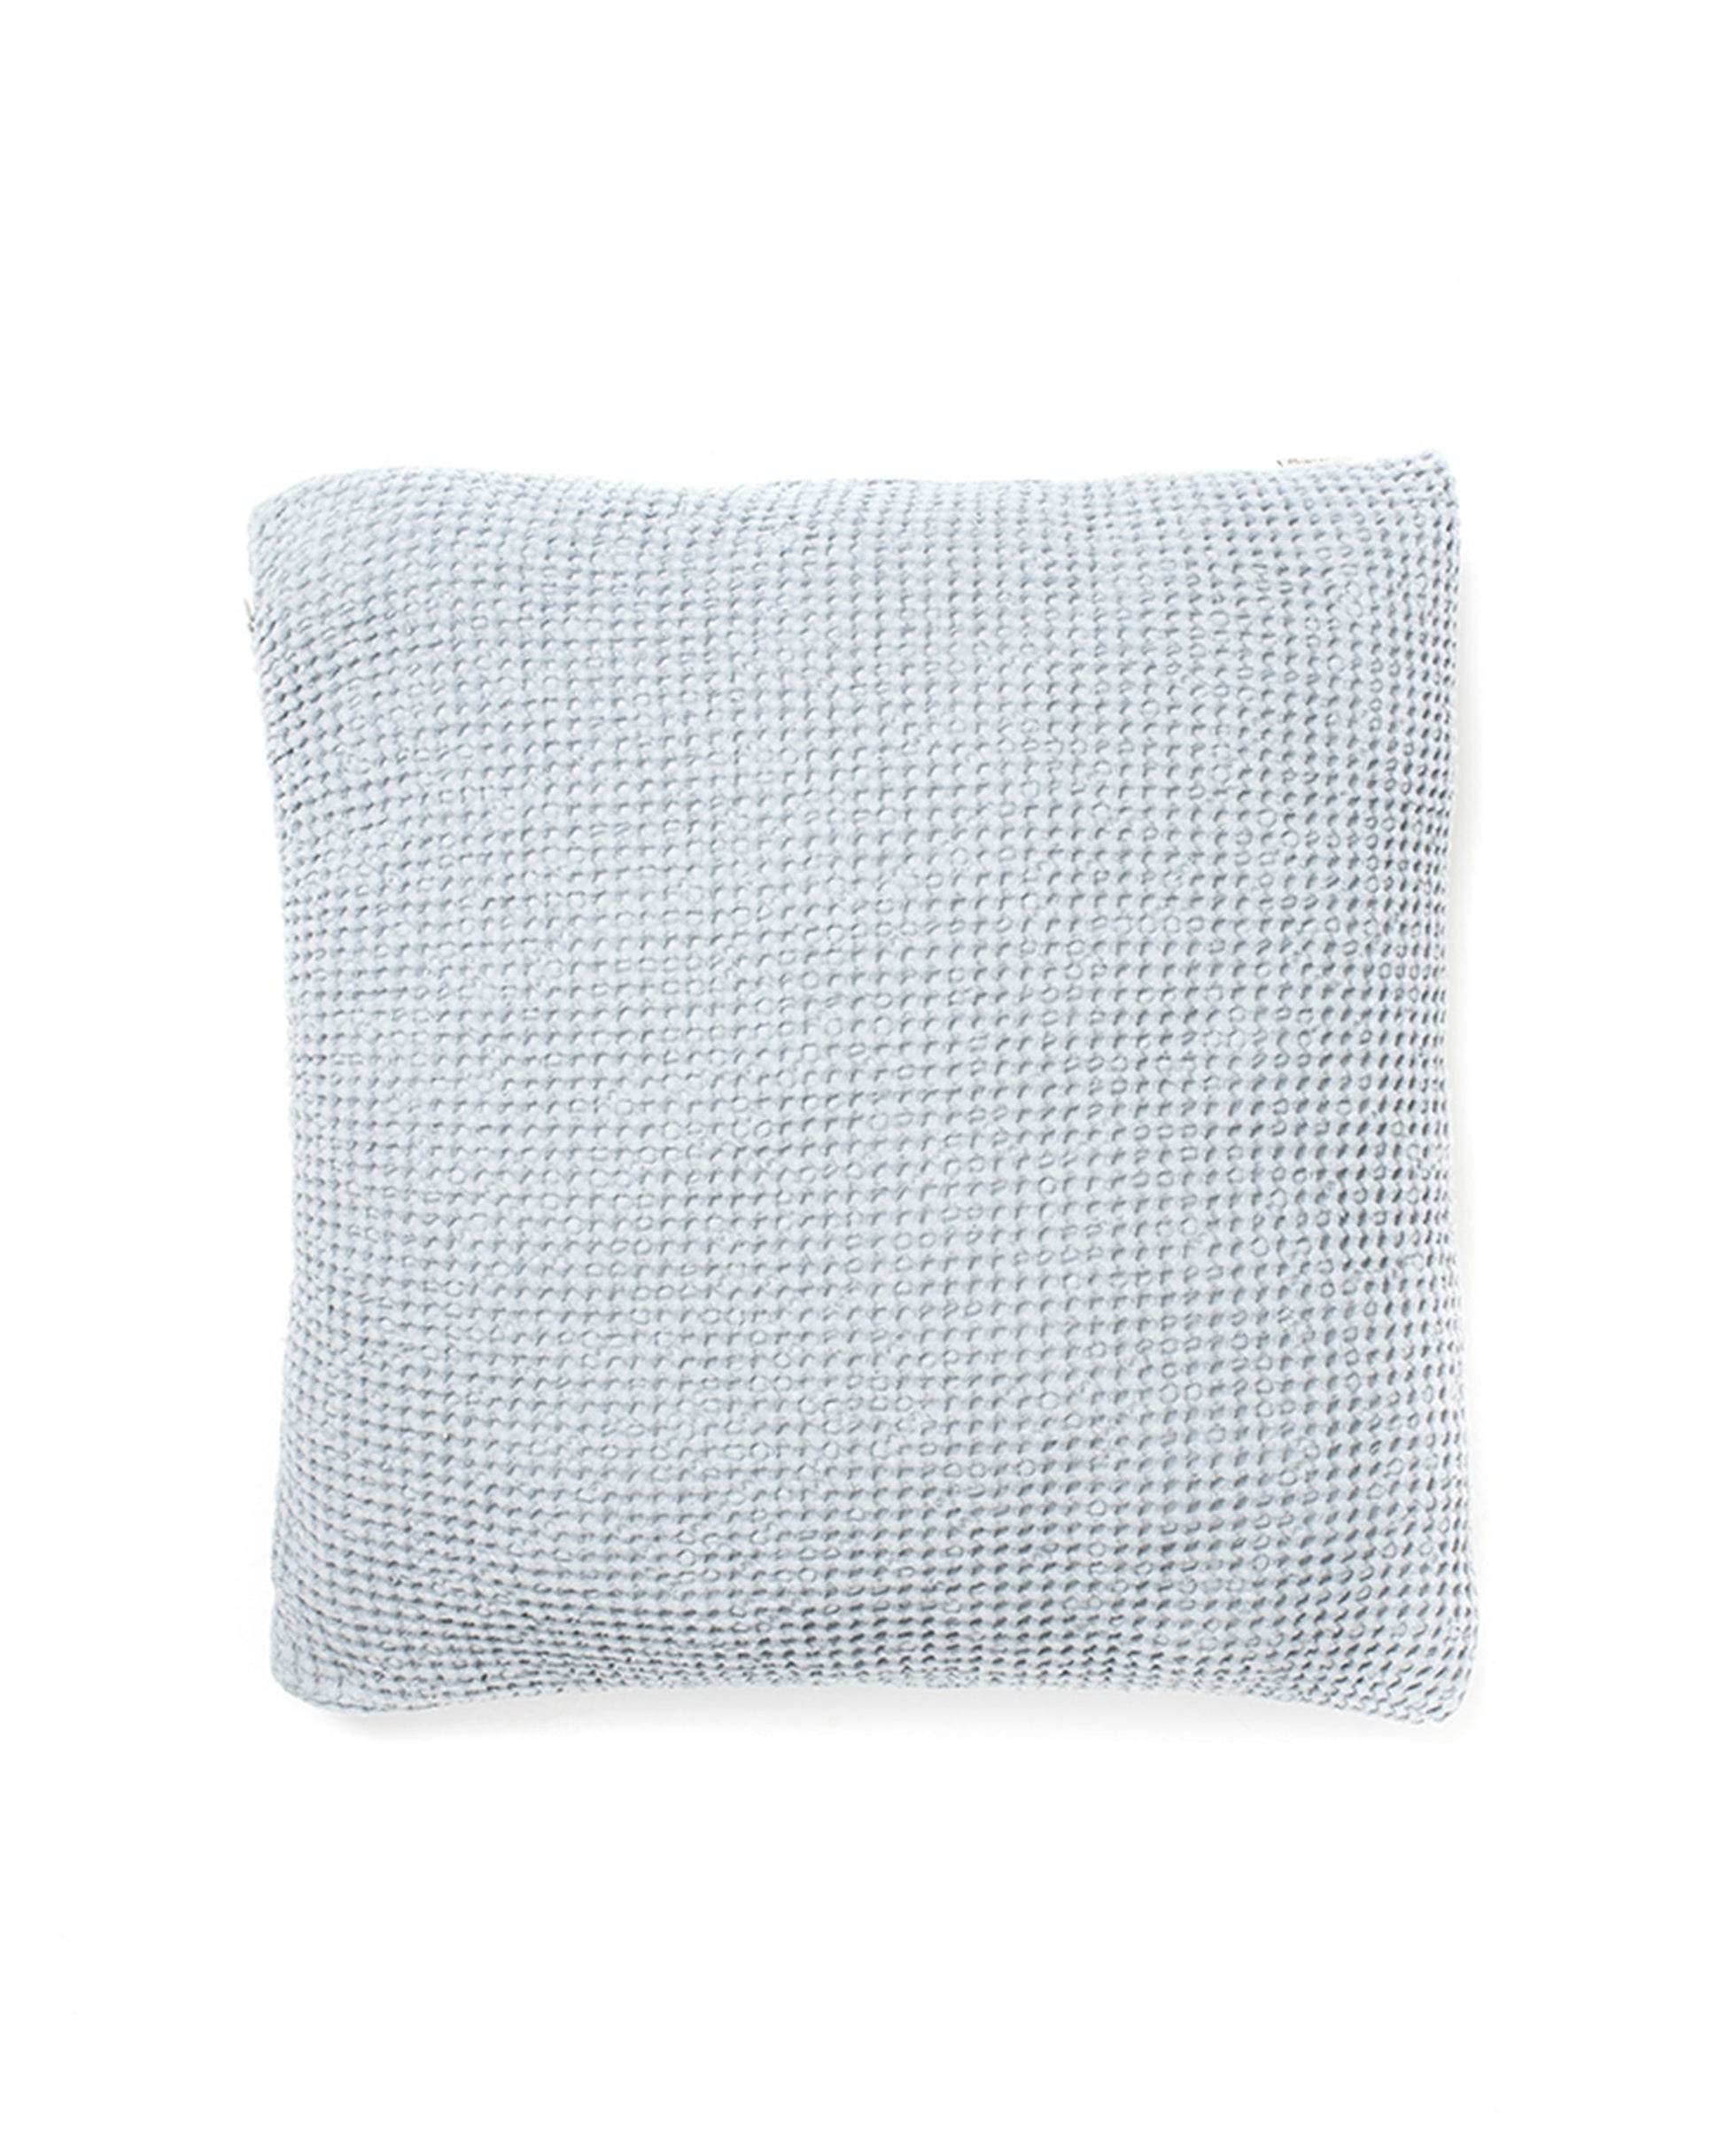 Waffle throw pillow cover in Light gray - MagicLinen